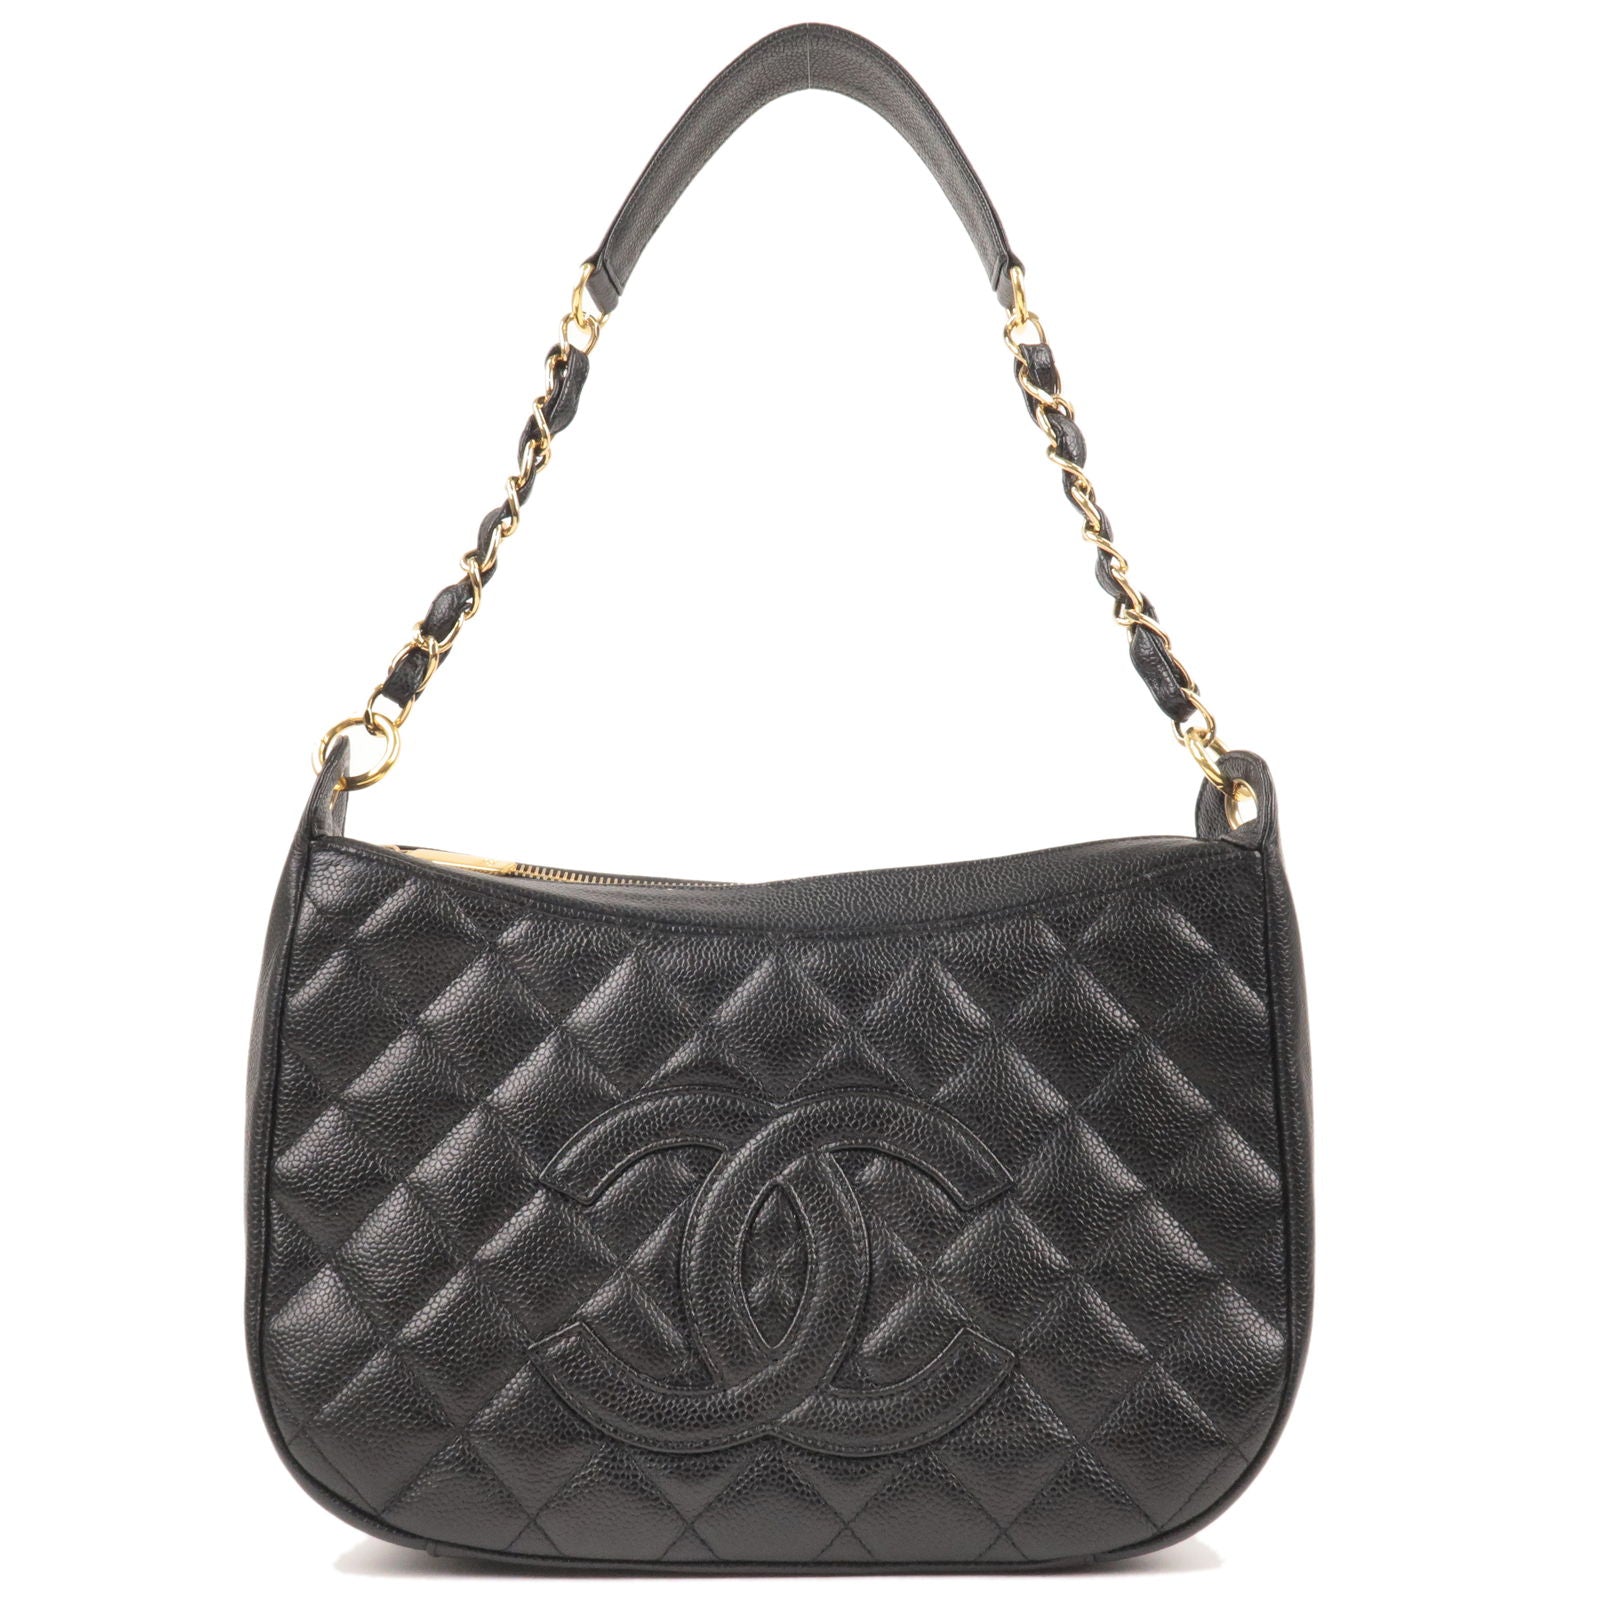 Chanel Black Caviar Leather Timeless CC Soft Shopping Tote Bag